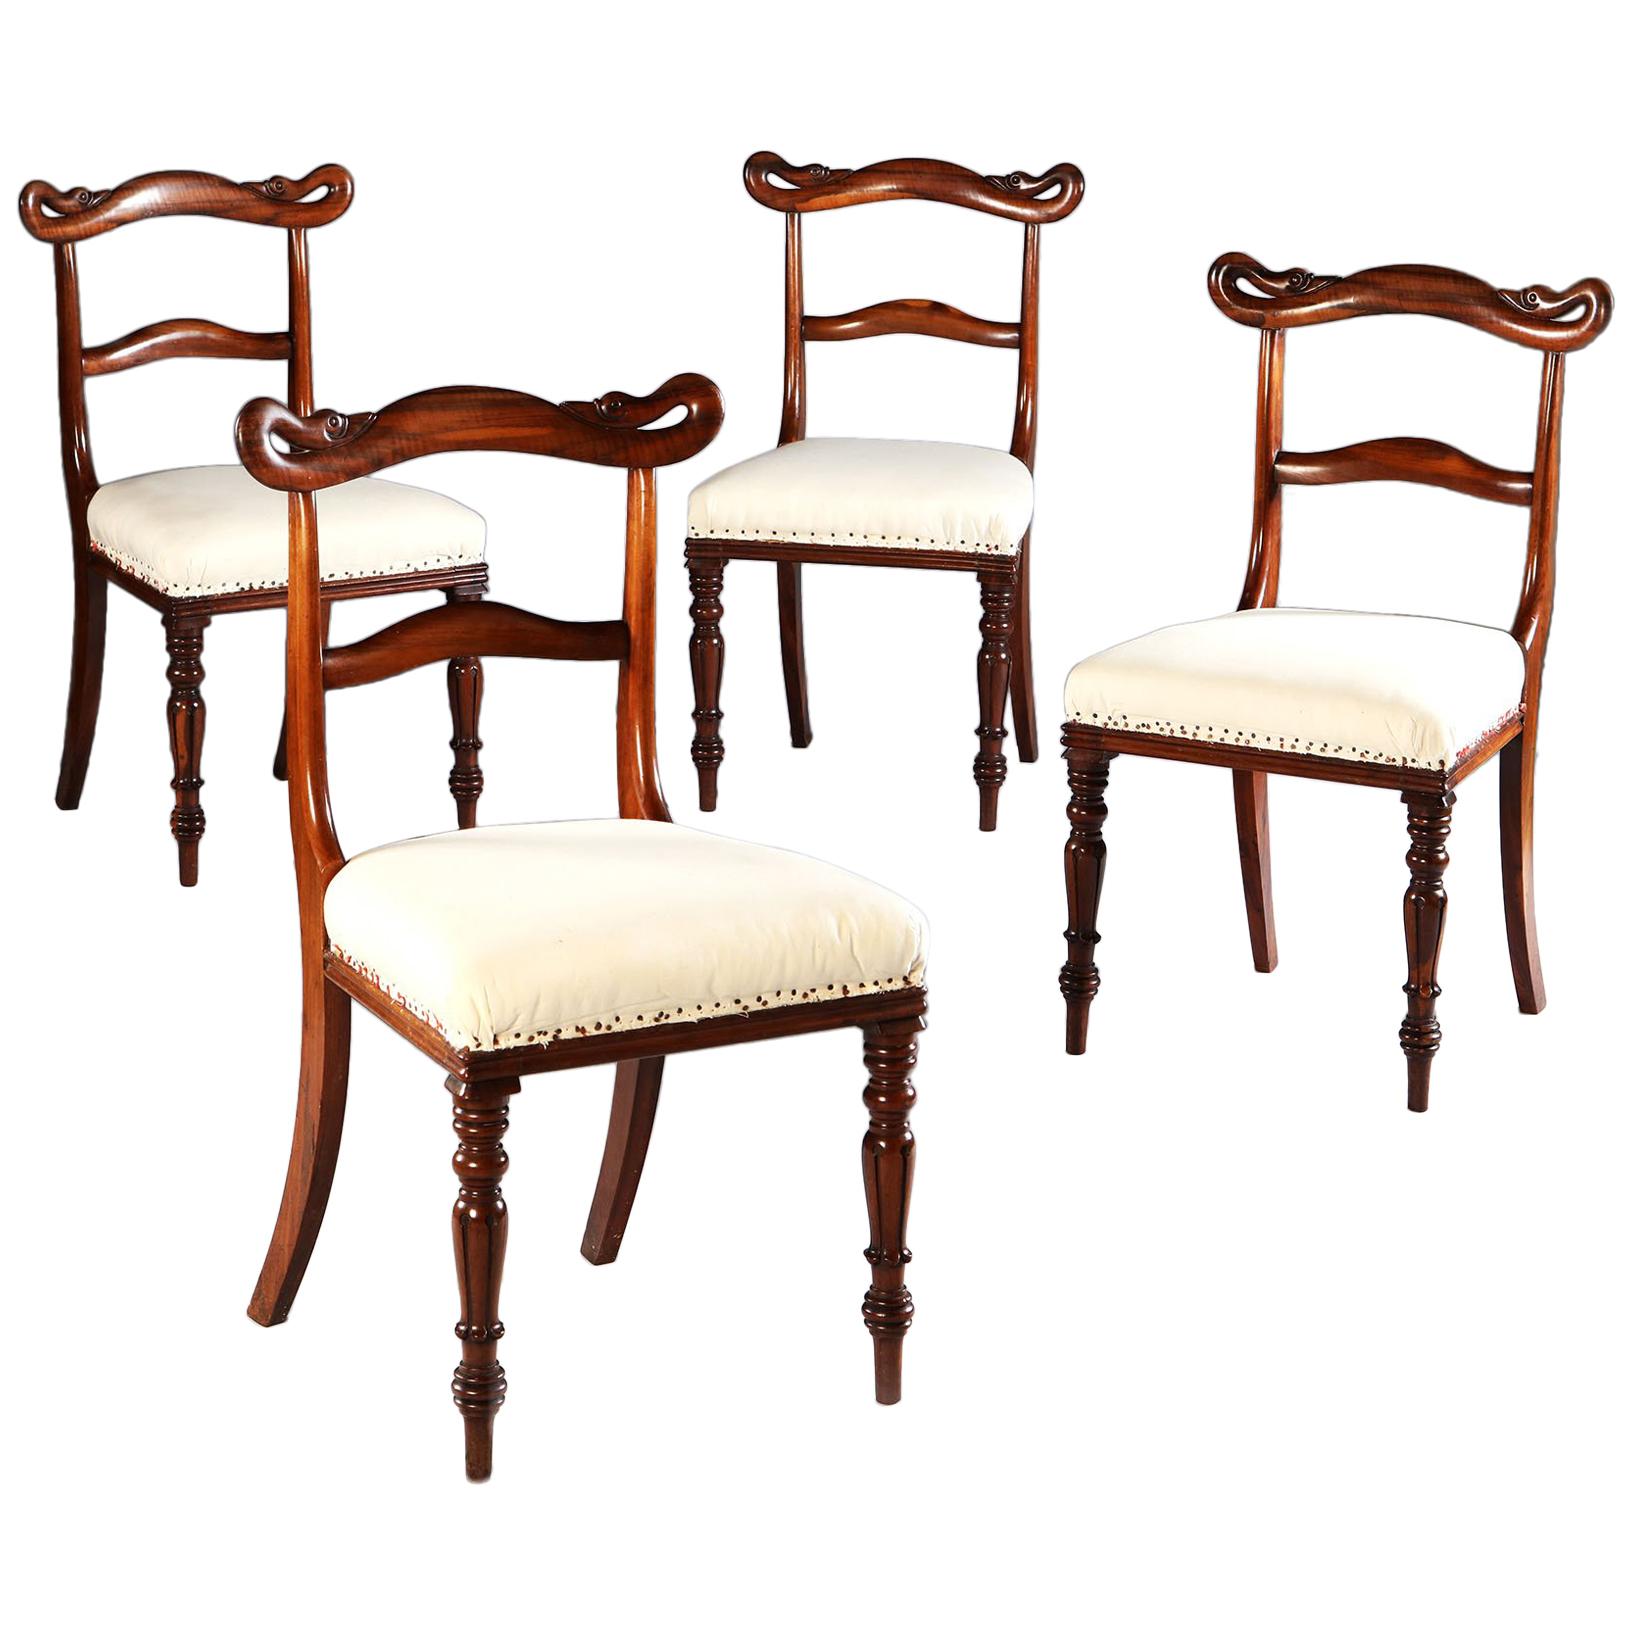 Set of Four 19th Century English Goncalo Alves Wooden Side Chairs with Swan Back